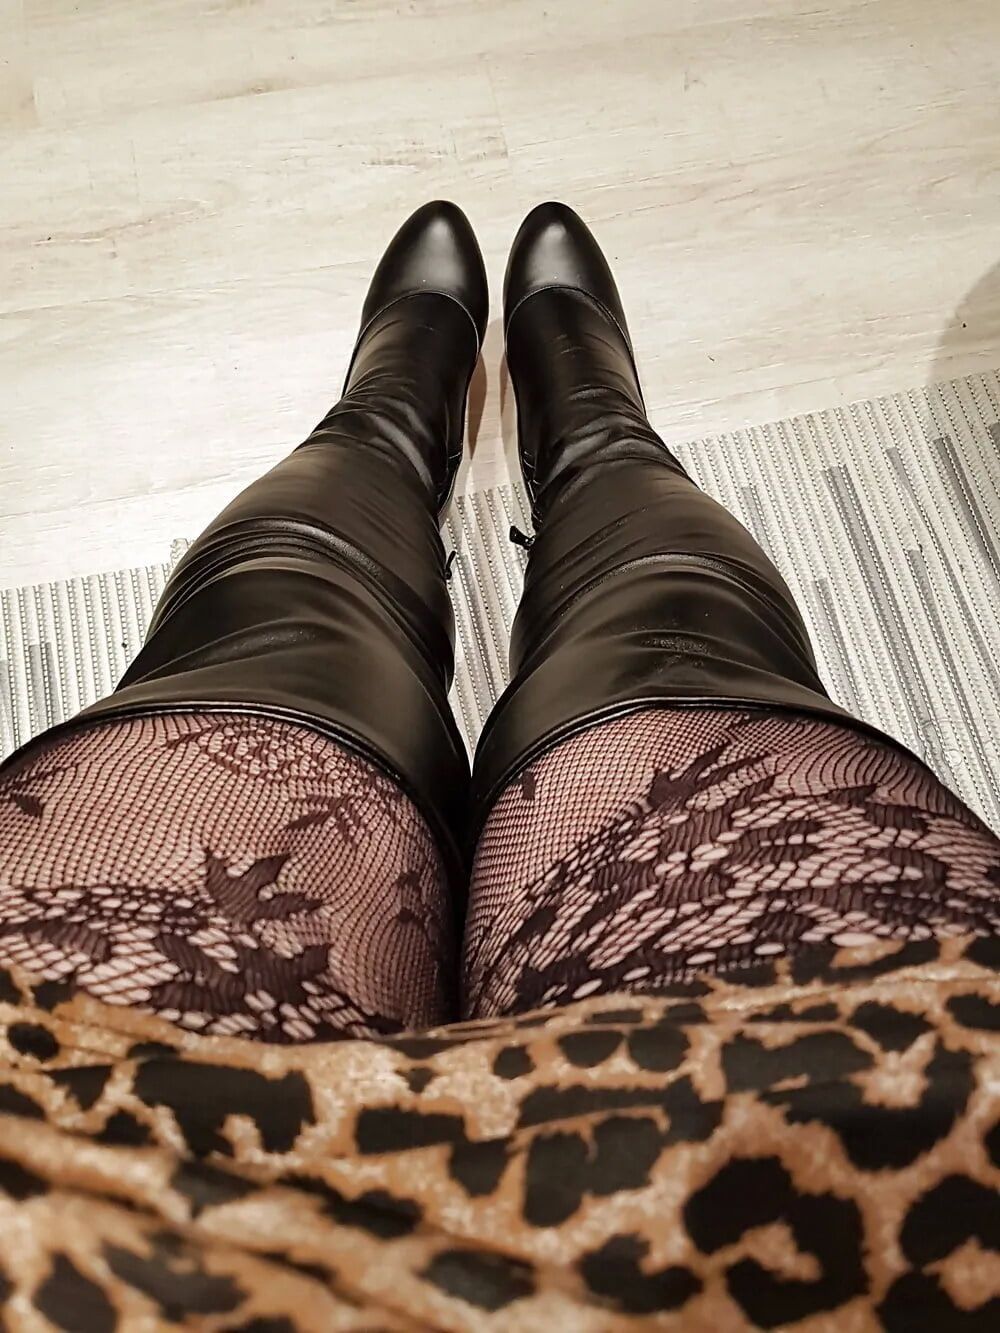 Lepard outfit with black boots and lingerie #4